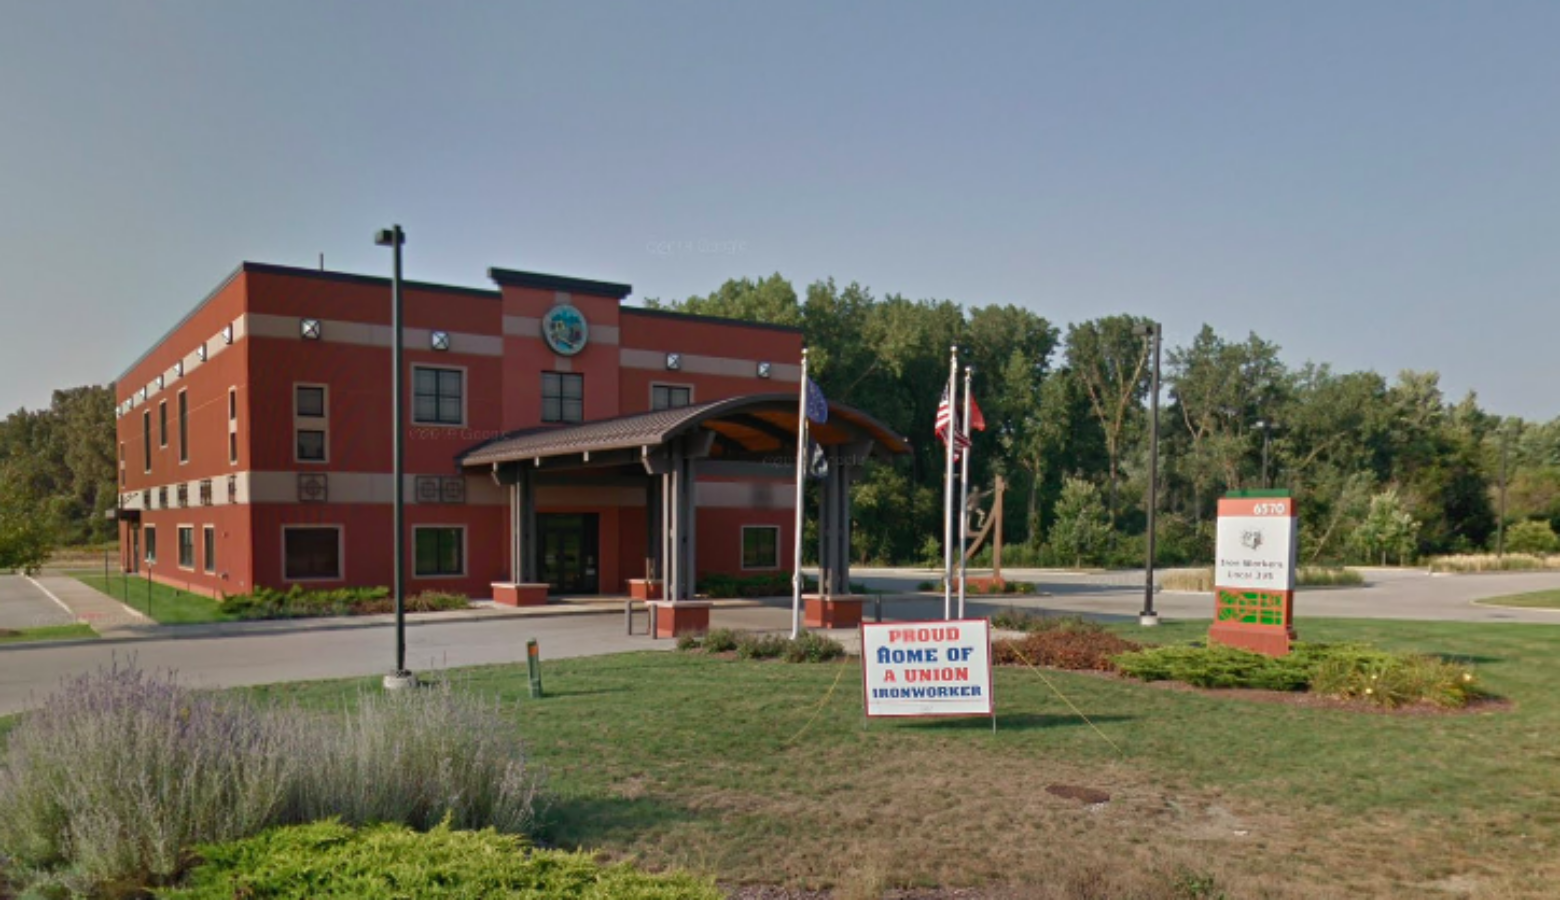 The headquarters of Iron Workers Local #395 in Portage, Indiana. (Google Maps)